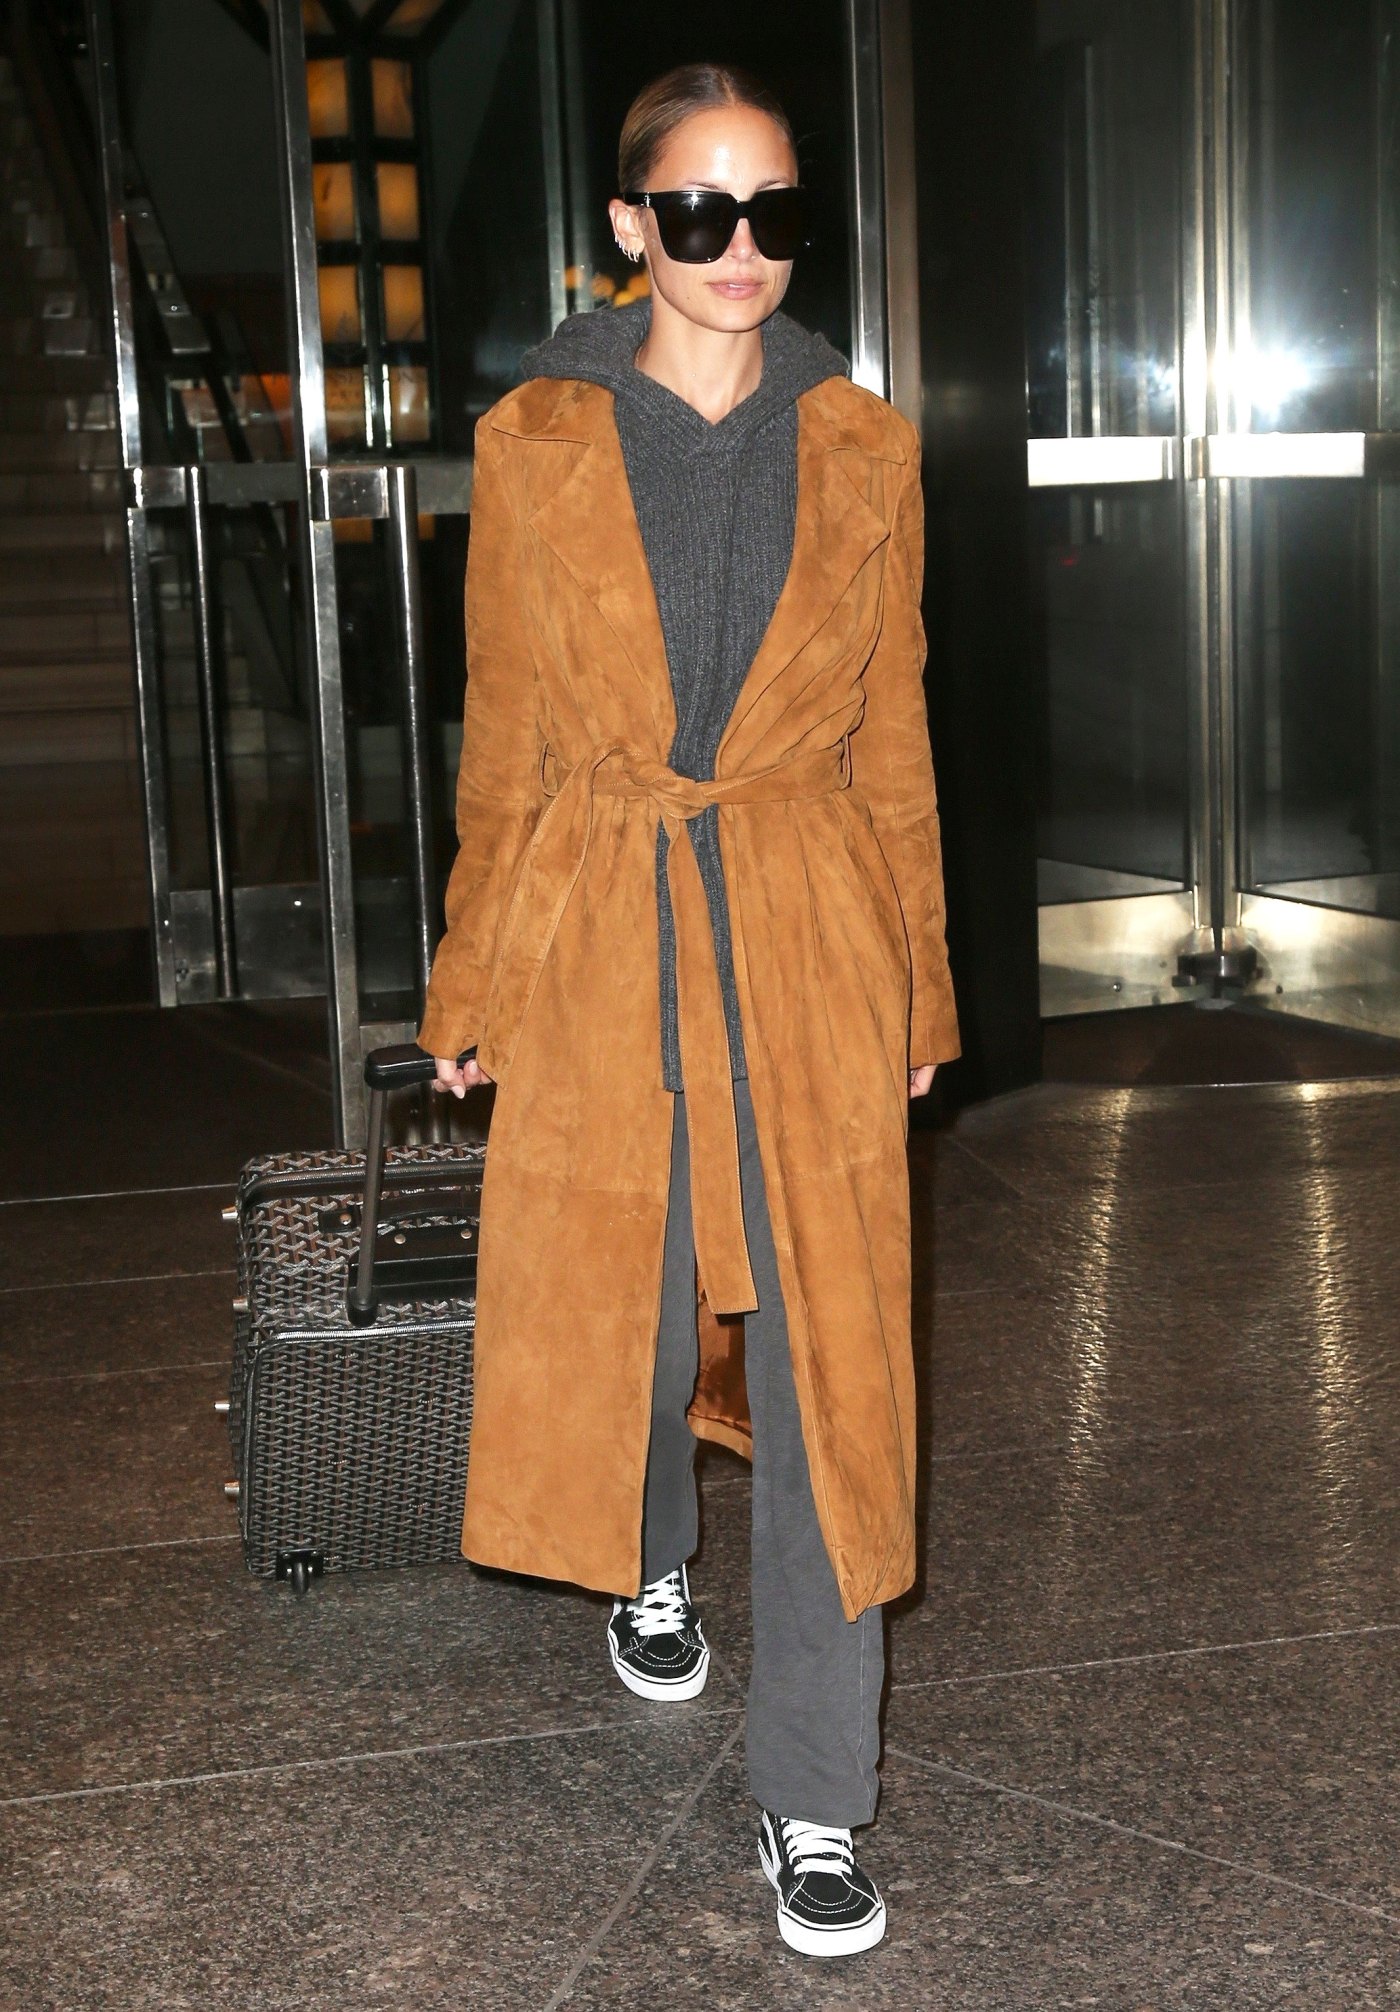 Nicole Richie Wears a House of Harlow Suede Coat to Travel